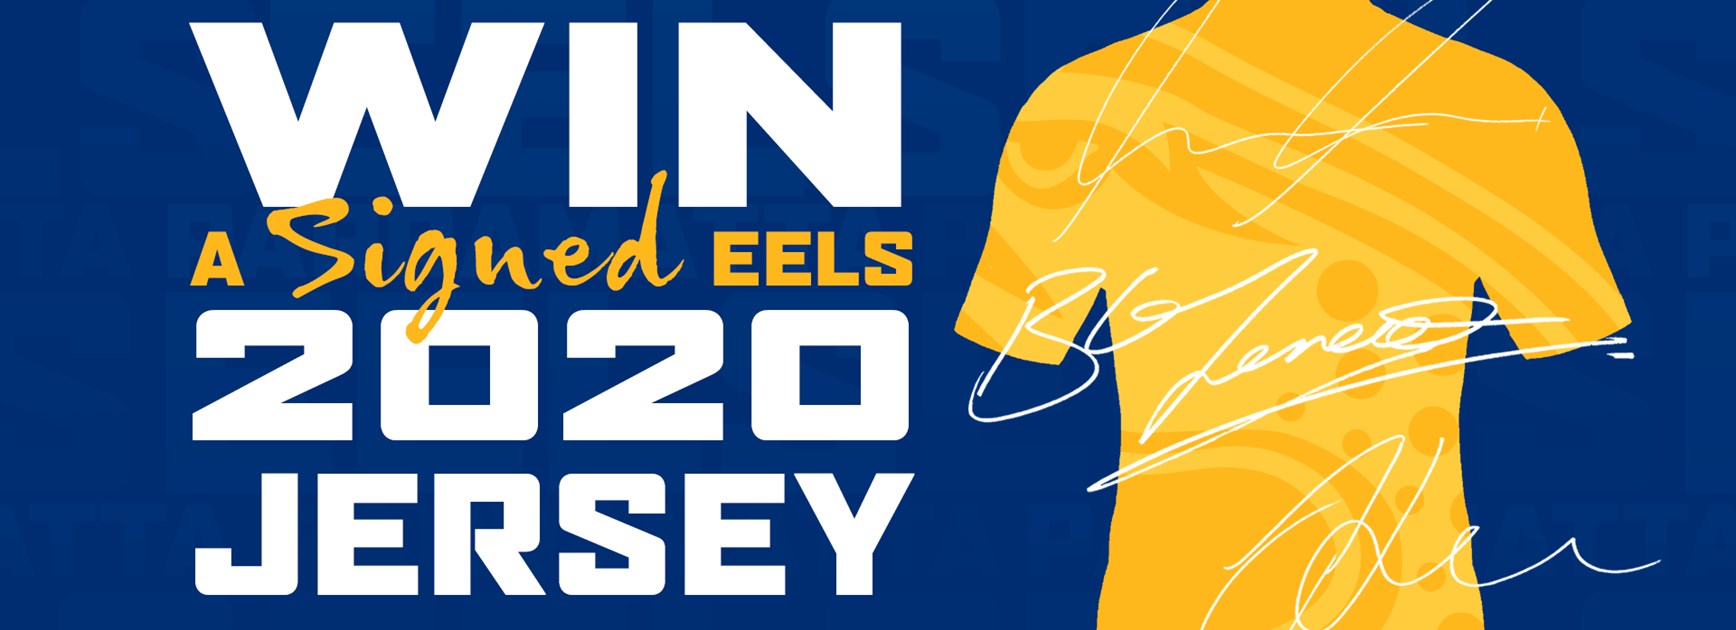 Win a signed 2020 Eels jersey